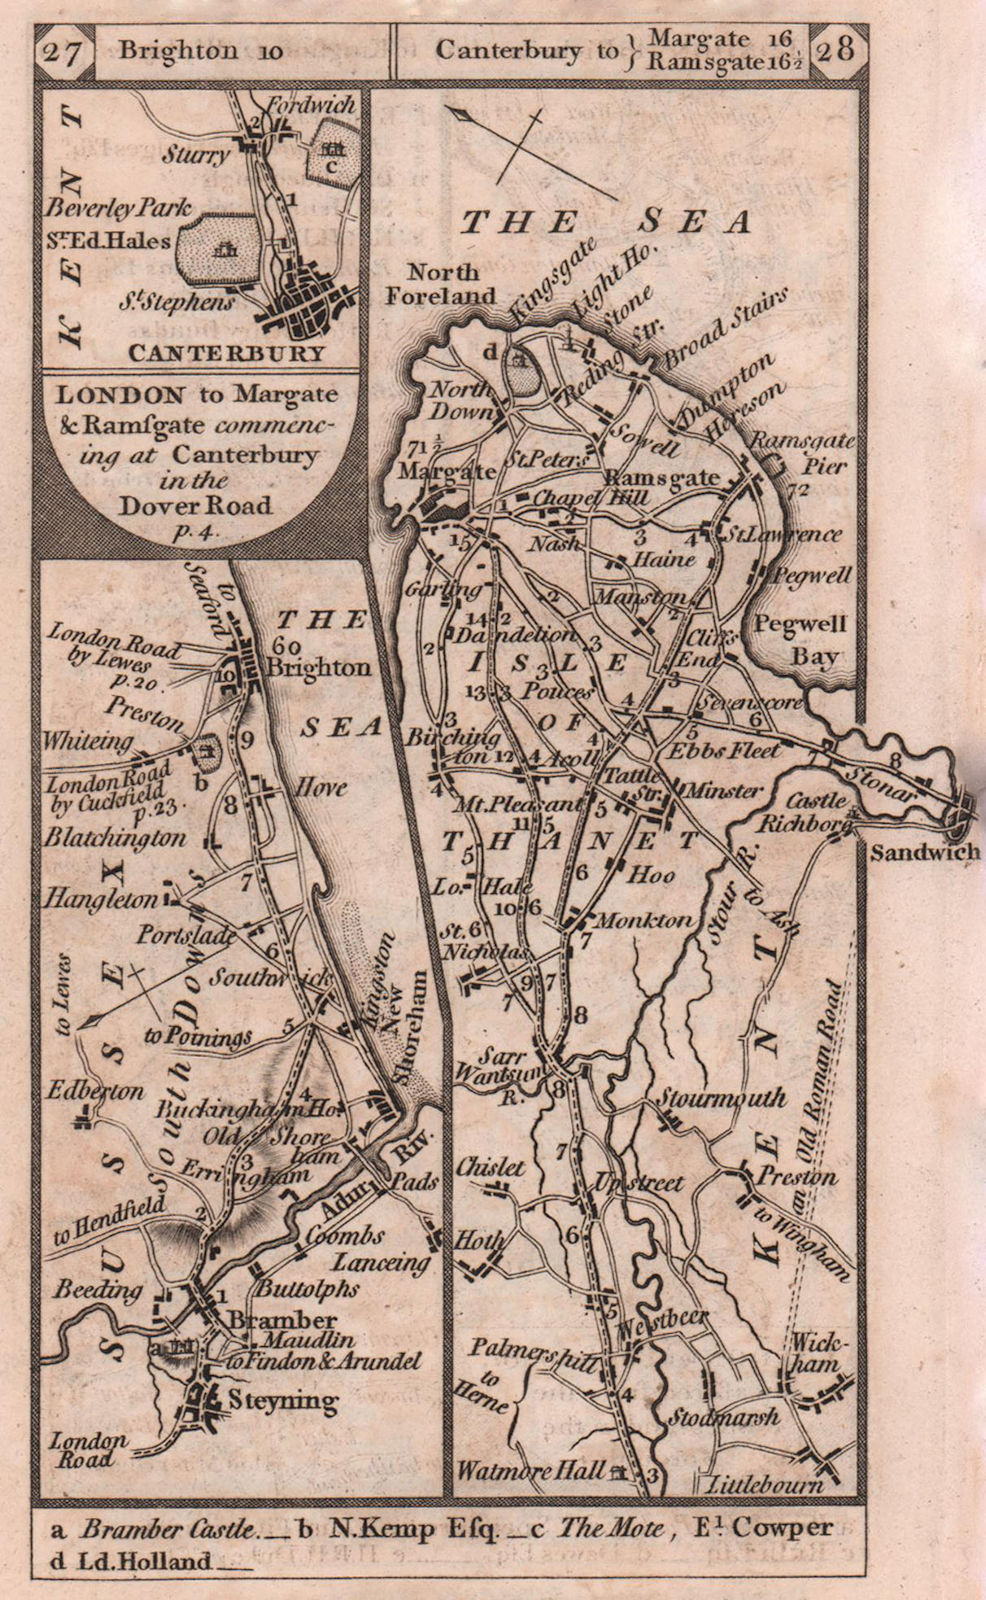 Associate Product Steyning-Brighton. Canterbury-Ramsgate-Margate road strip map PATERSON 1803